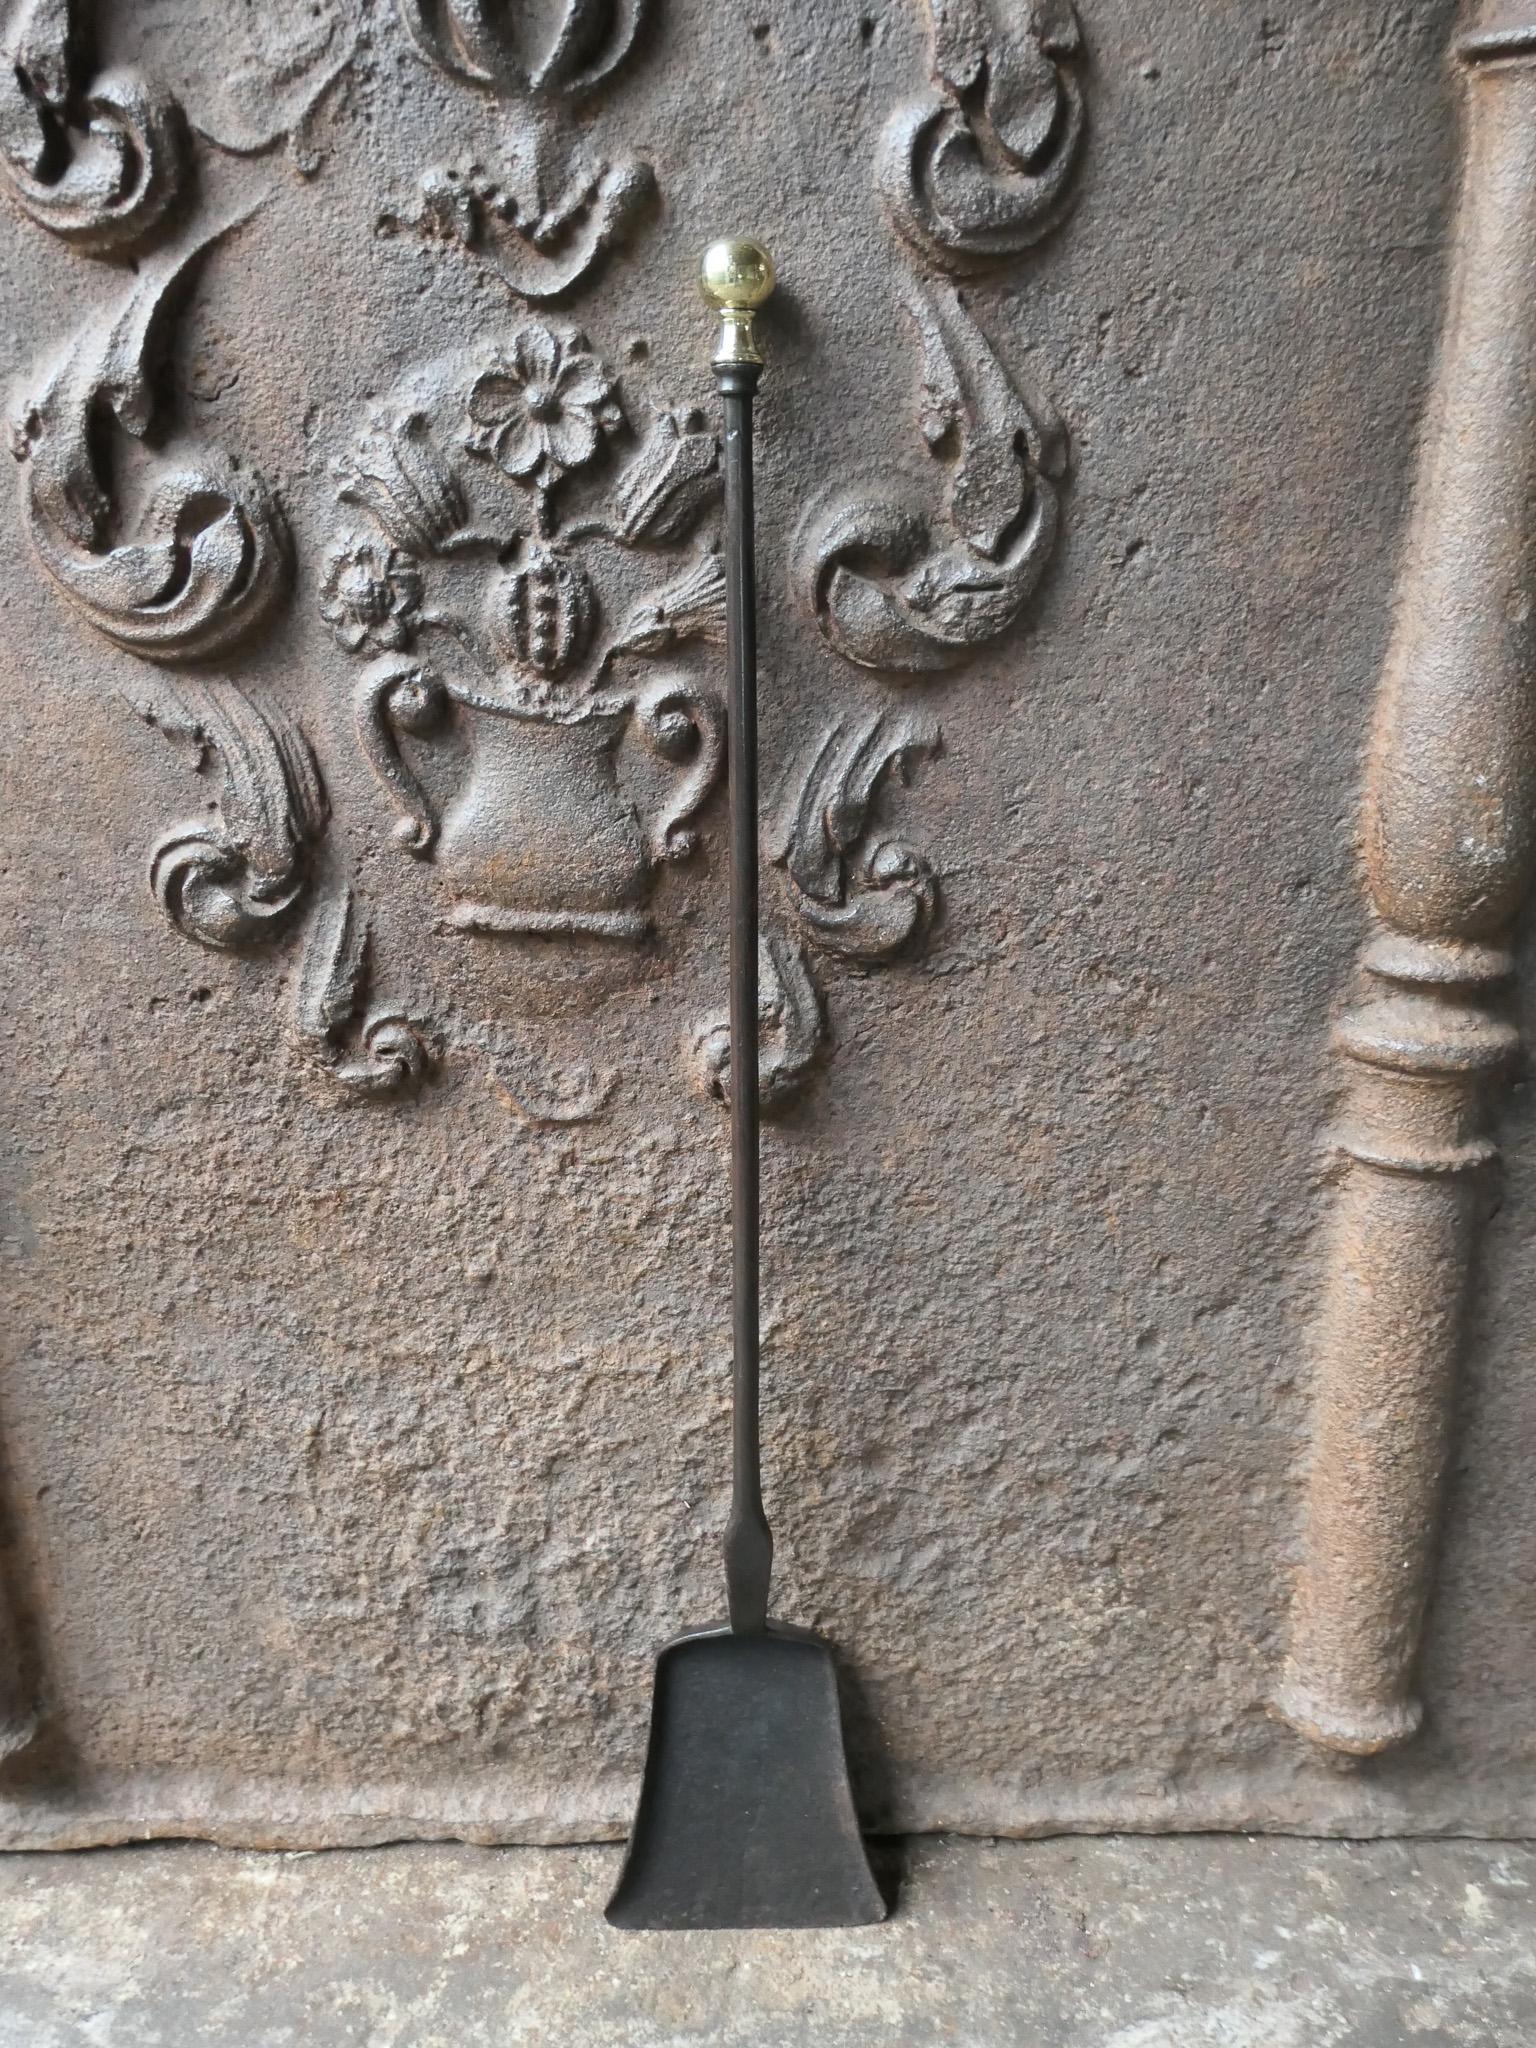 18th century Dutch fireplace shovel made of wrought iron. The handle is decorated with polished brass. The item is fully functional and fit for use in the fireplace.